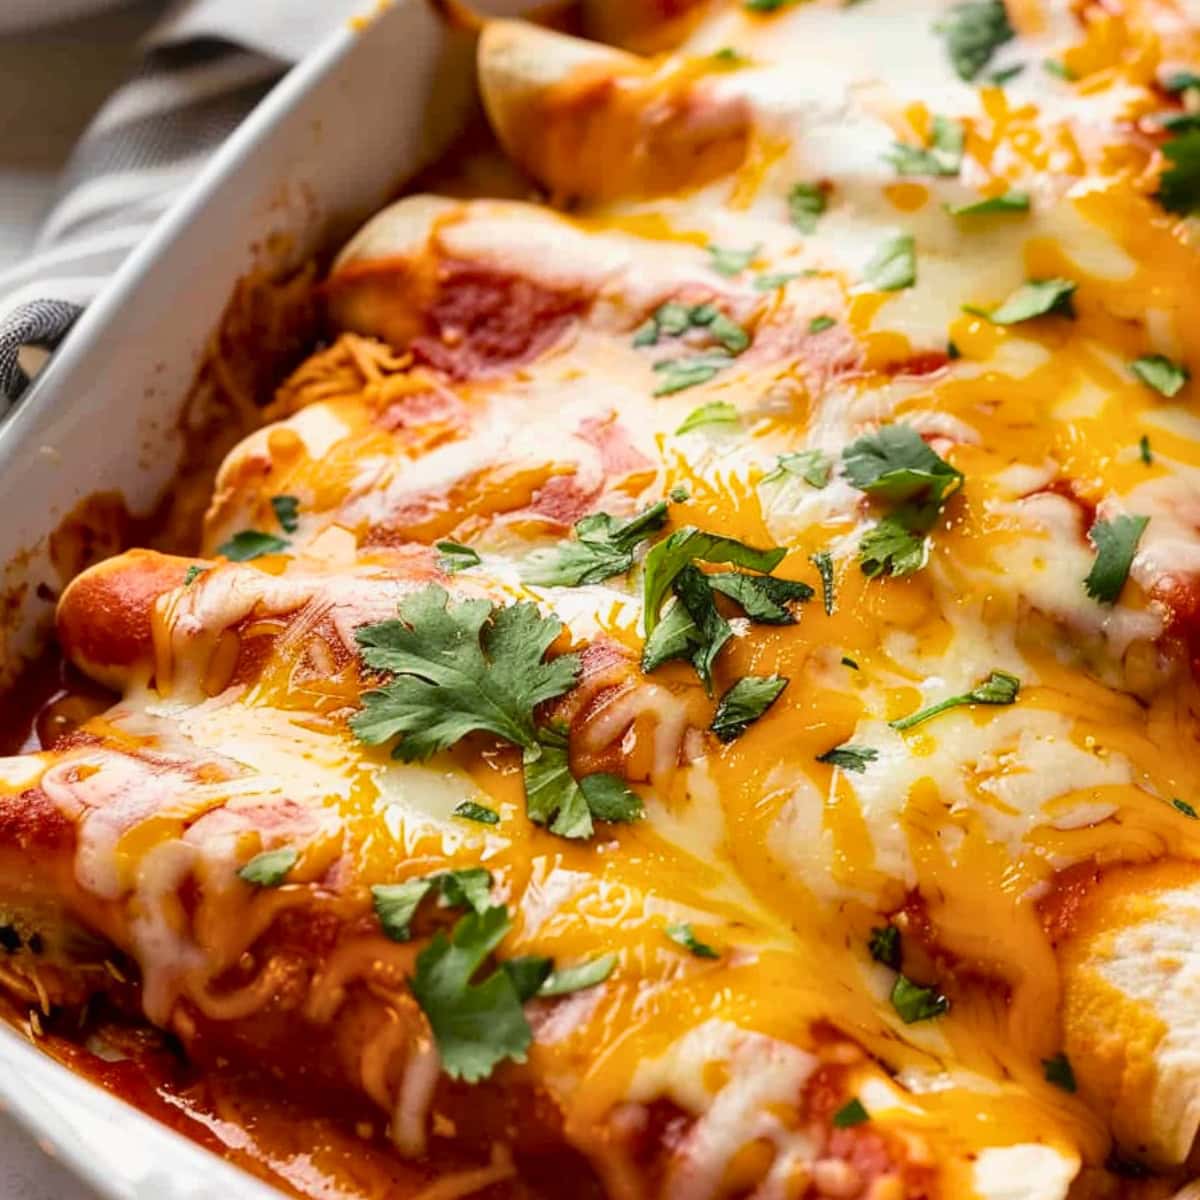 Cheesy chicken enchilada in baking dish garnished with cilantro leaves.